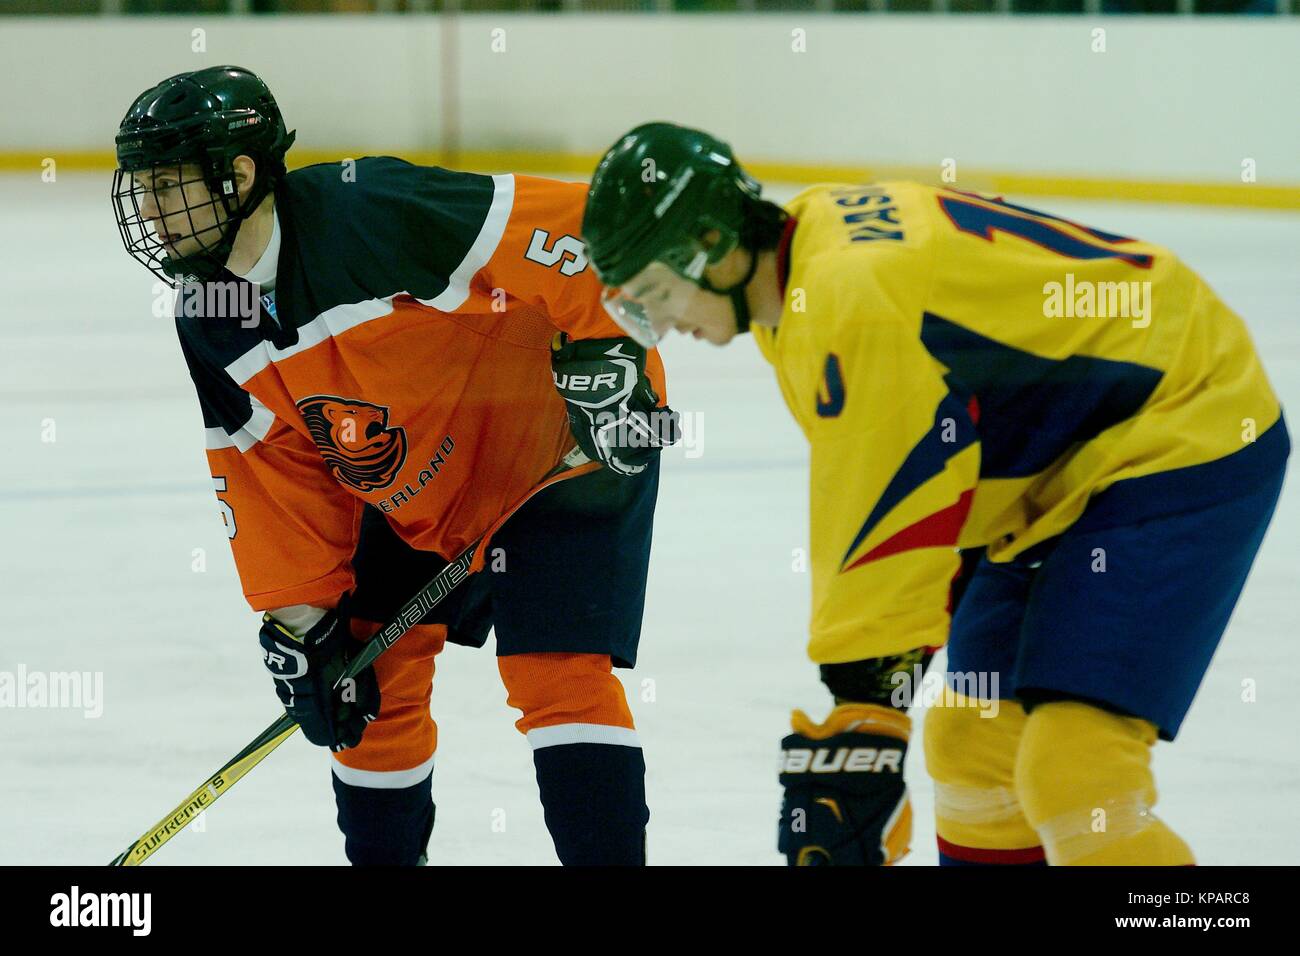 Dumfries, Scotland, 14 December 2017. Jorn van Soest, left, of Netherlands and Andrei Vasile of Romania ready for a face off during their match in the 2018 IIHF Ice Hockey U20 World Championship Division II, Group A in Dumfries. Credit: Colin Edwards/Alamy Live News. Stock Photo